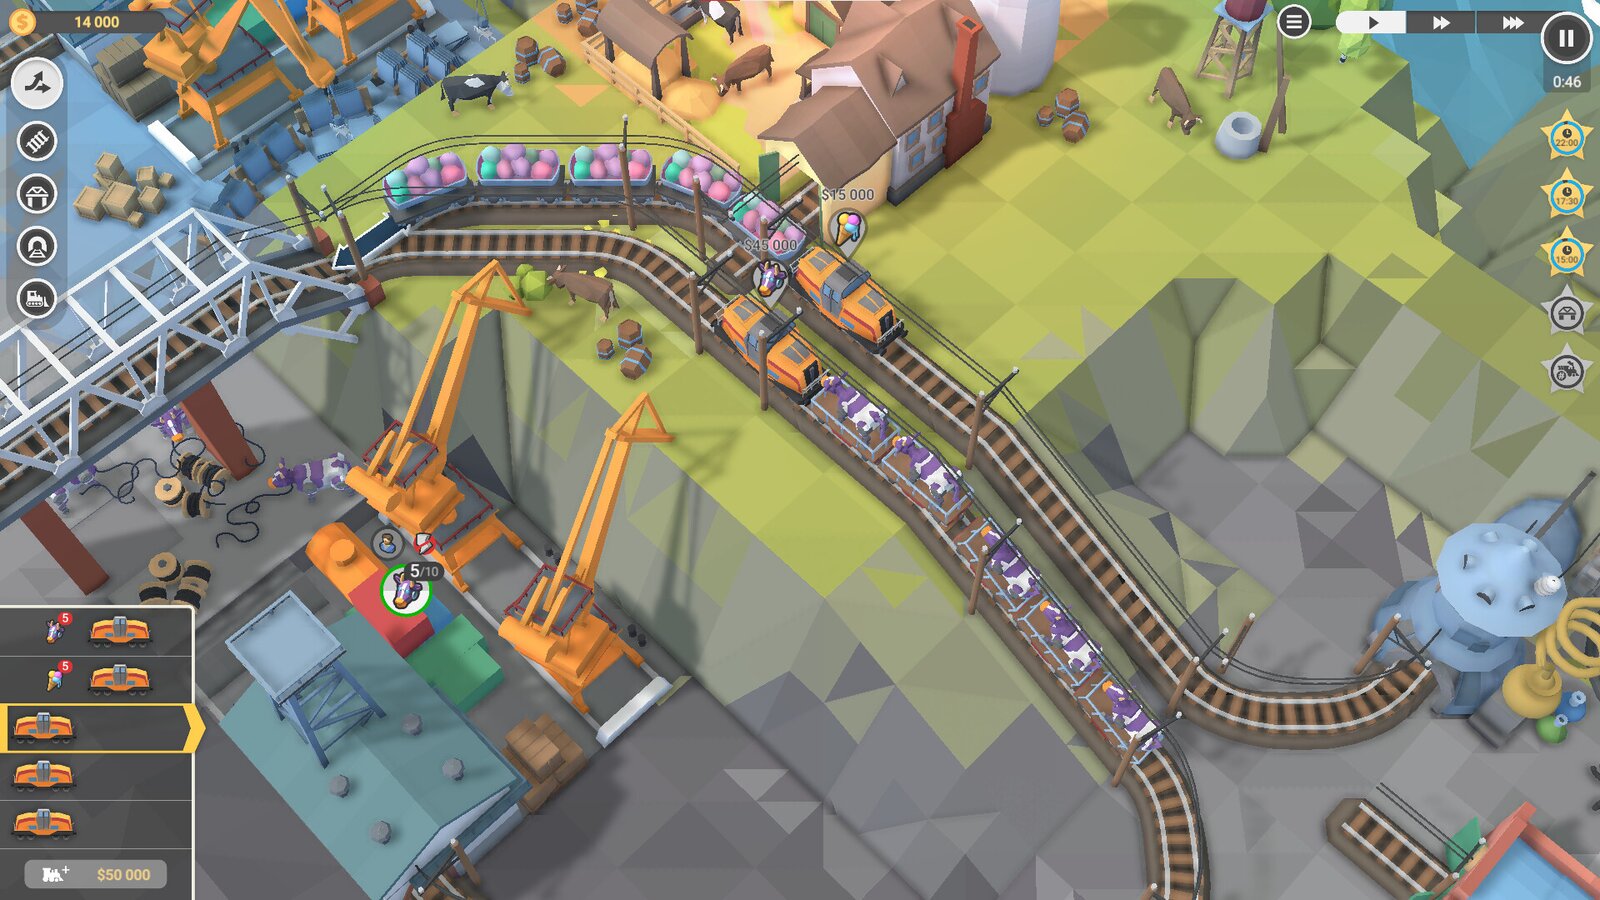 Train Valley 2 – Patent Pending